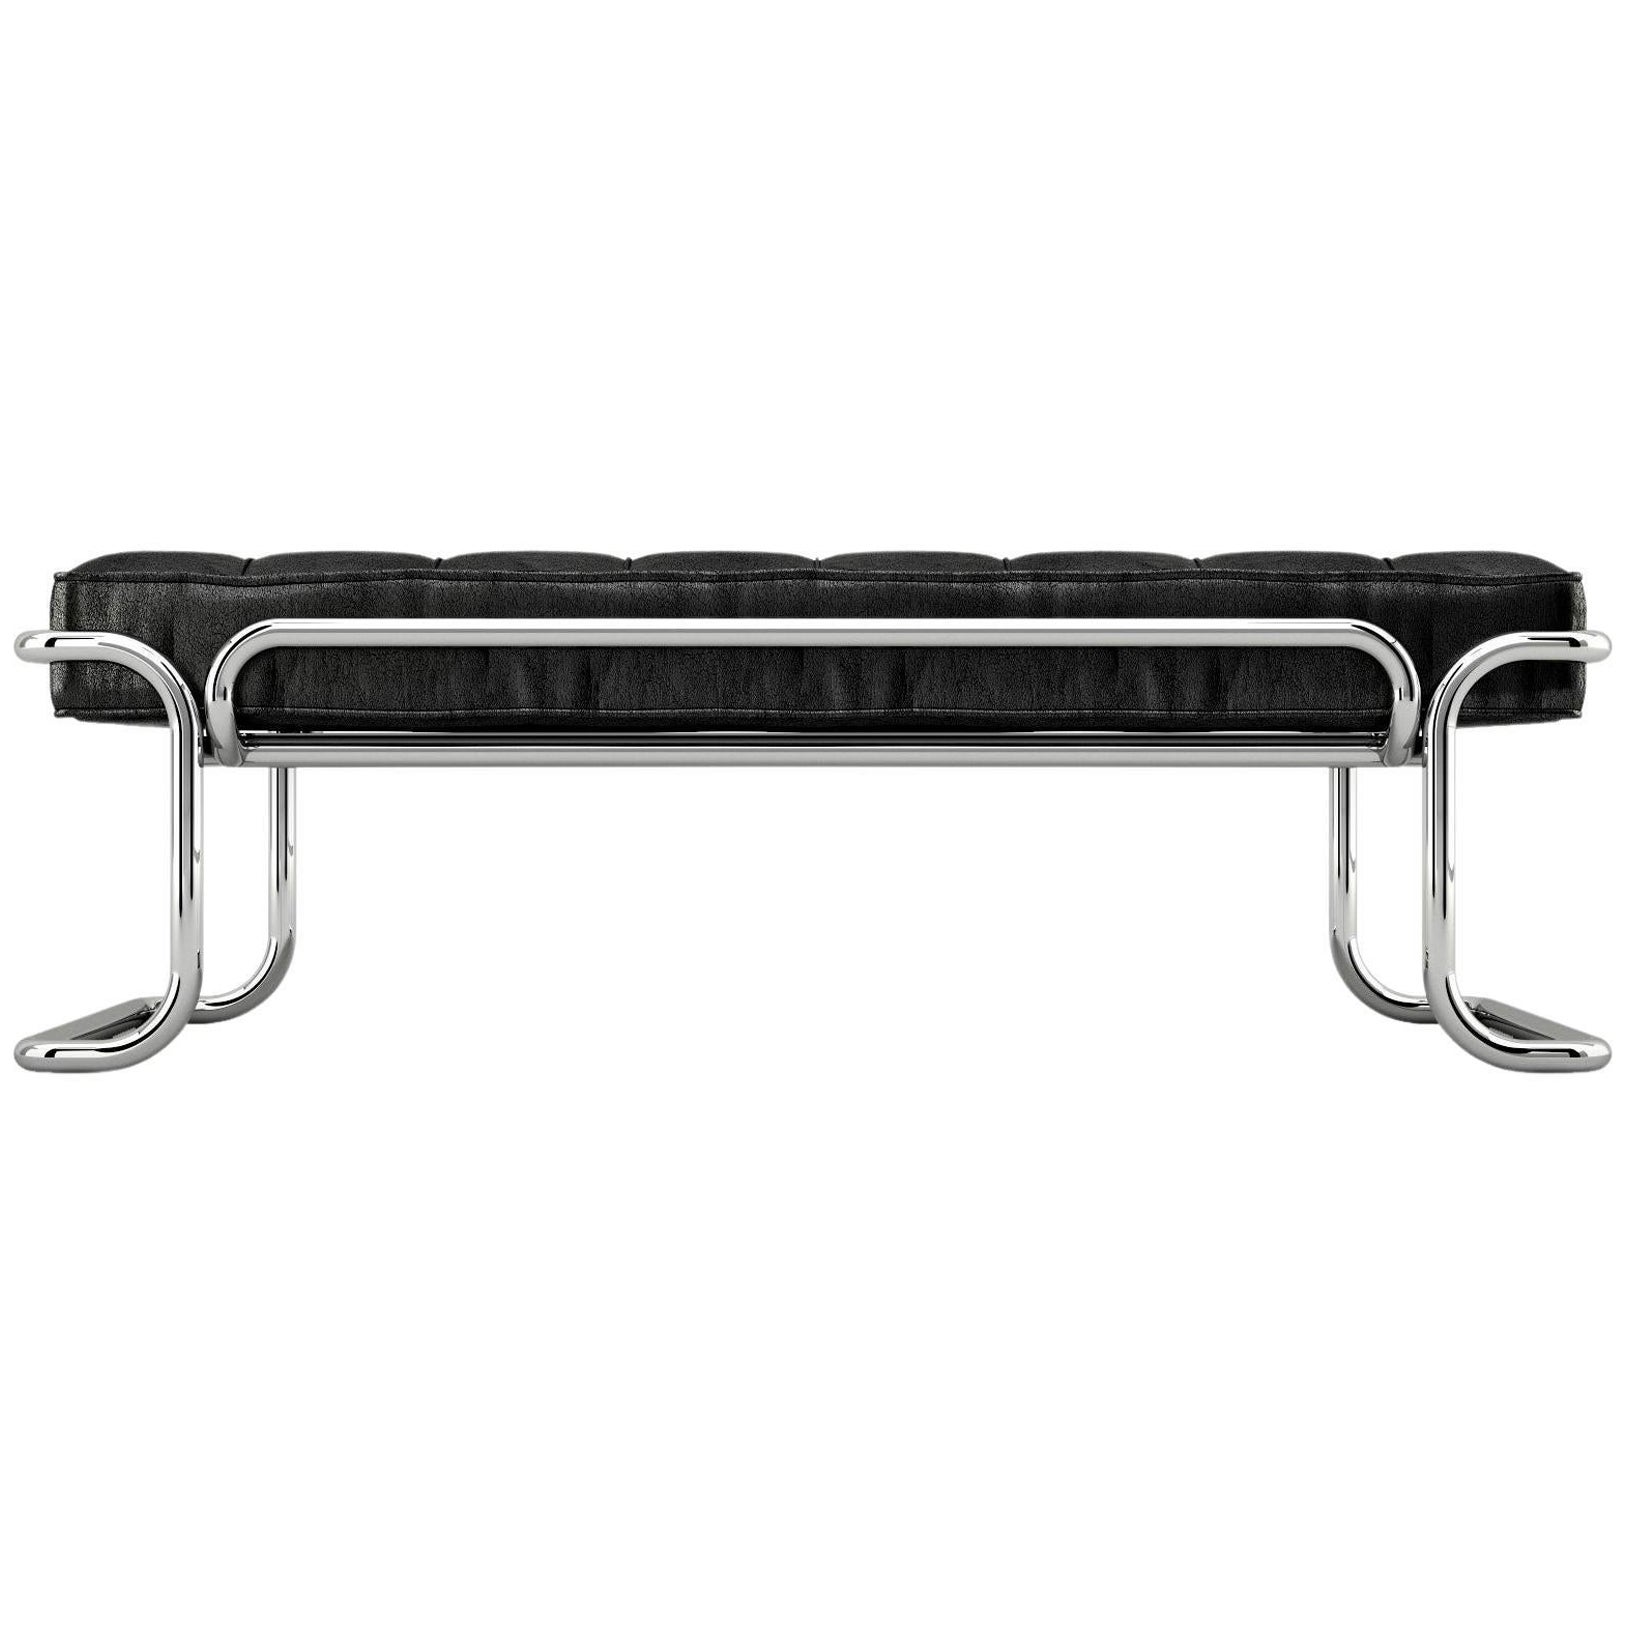 Lotus Banquette - Modern Black Leather Sofa with Stainless Steel Legs For Sale